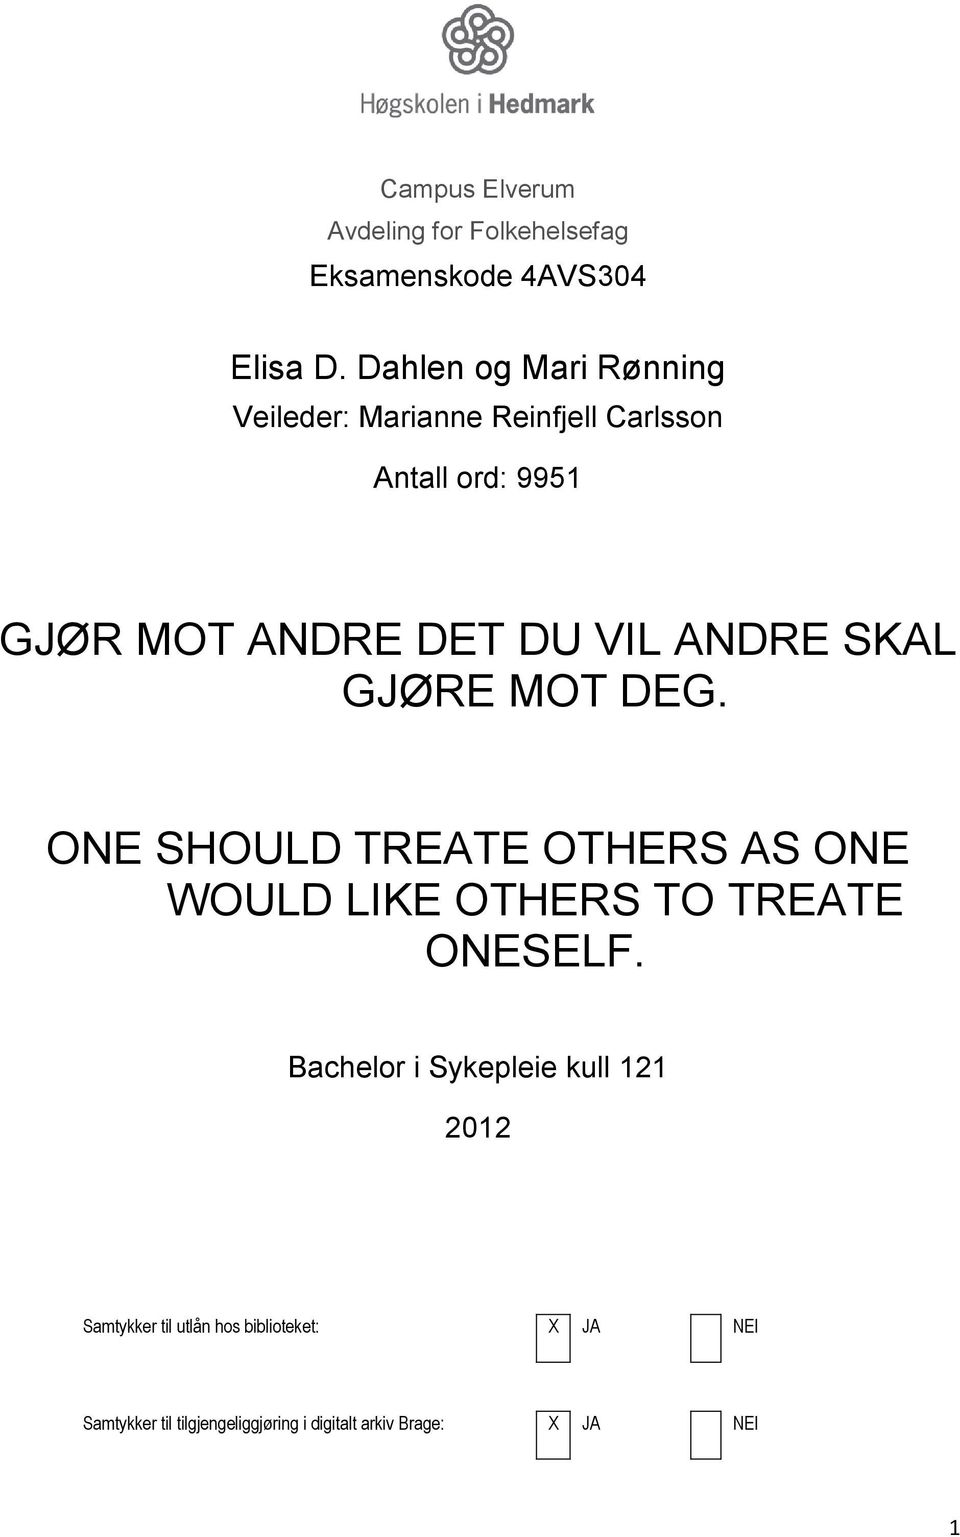 ANDRE SKAL GJØRE MOT DEG. ONE SHOULD TREATE OTHERS AS ONE WOULD LIKE OTHERS TO TREATE ONESELF.